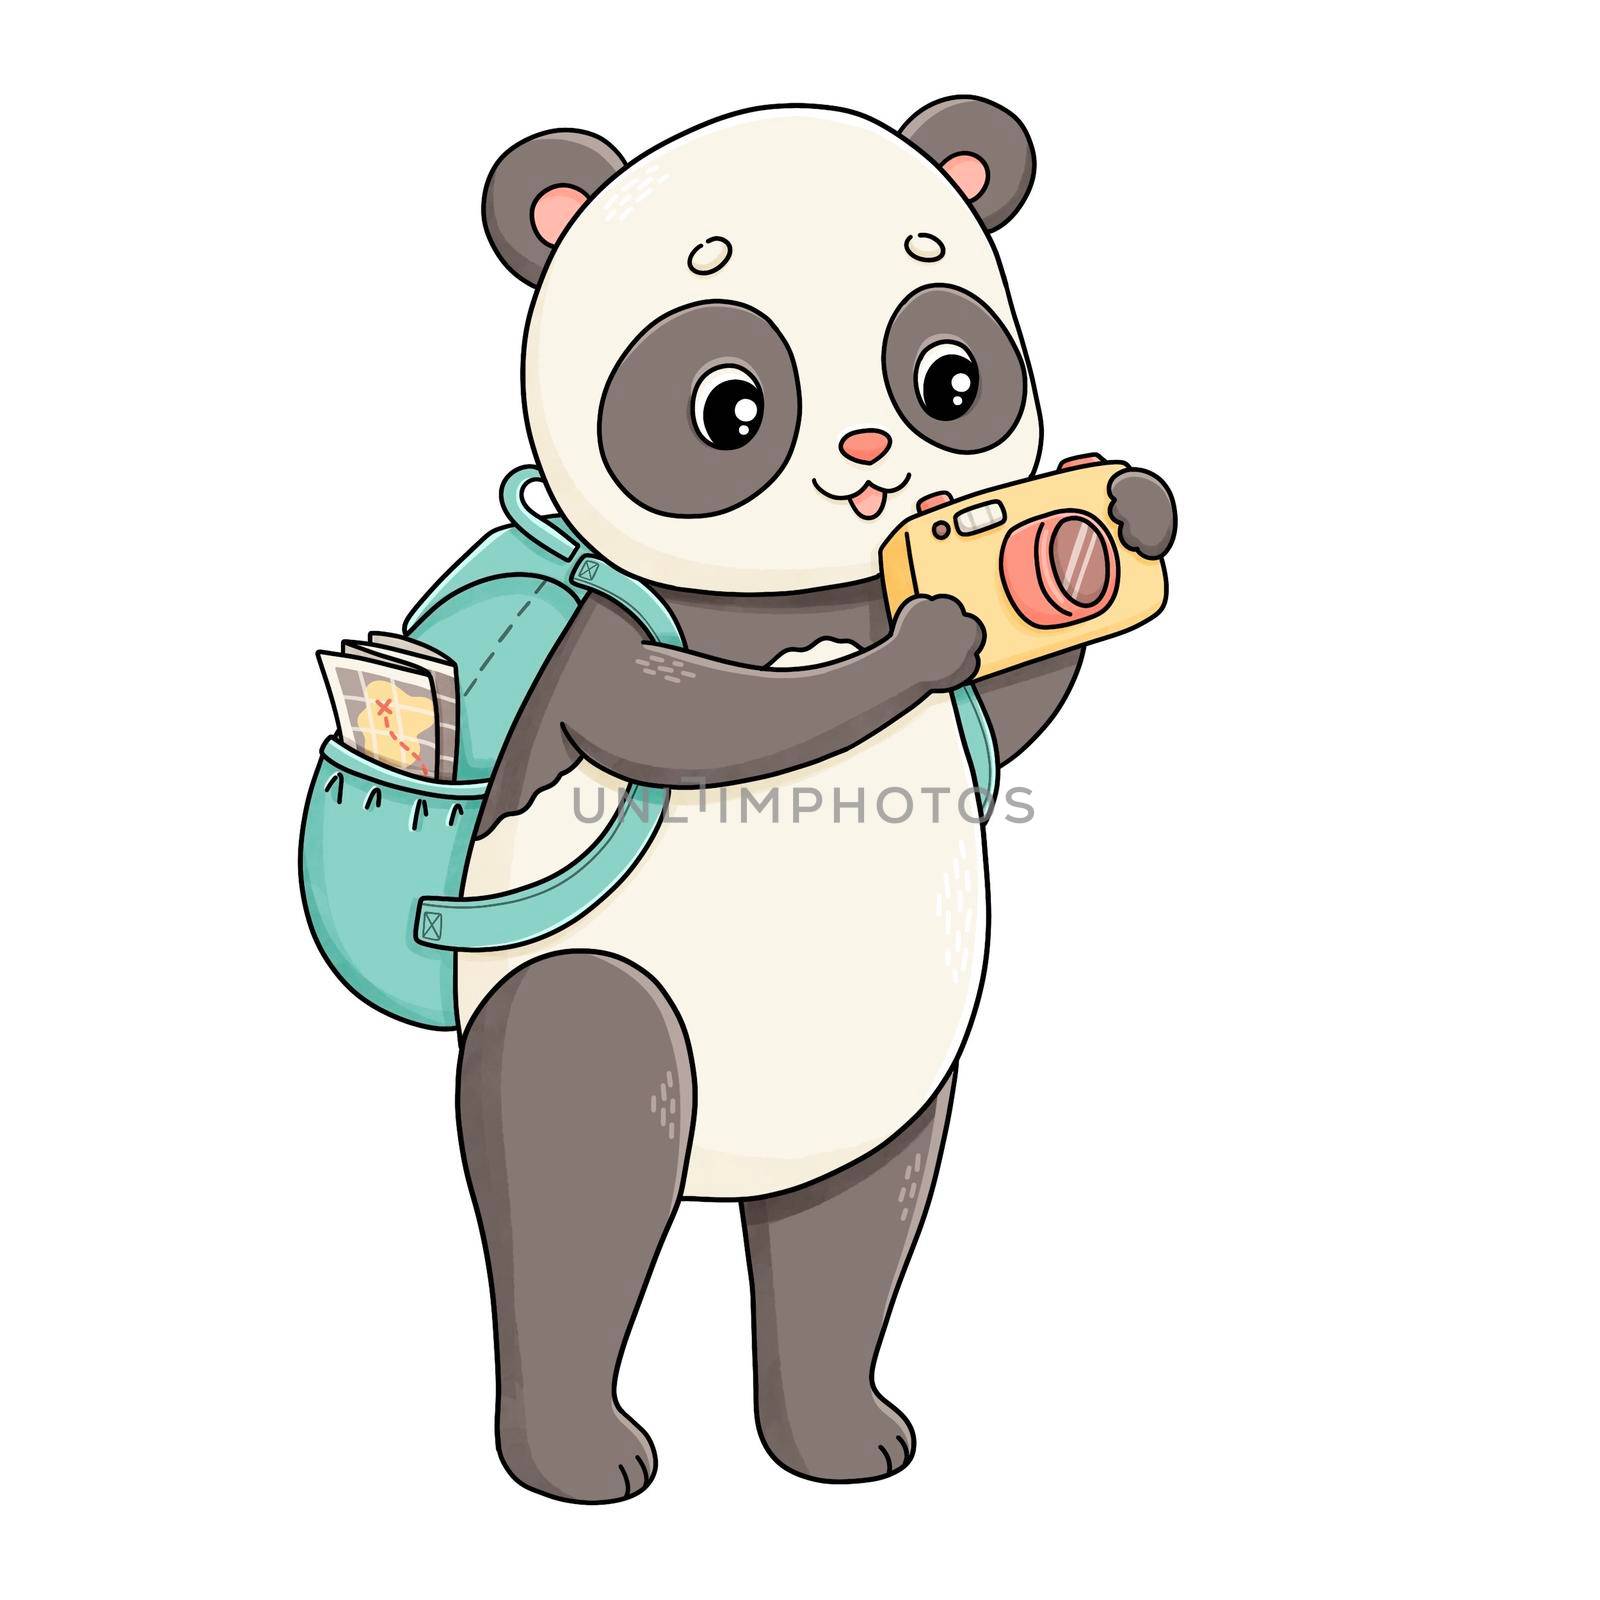 Summer panda with camera and backpack map by spirkaart